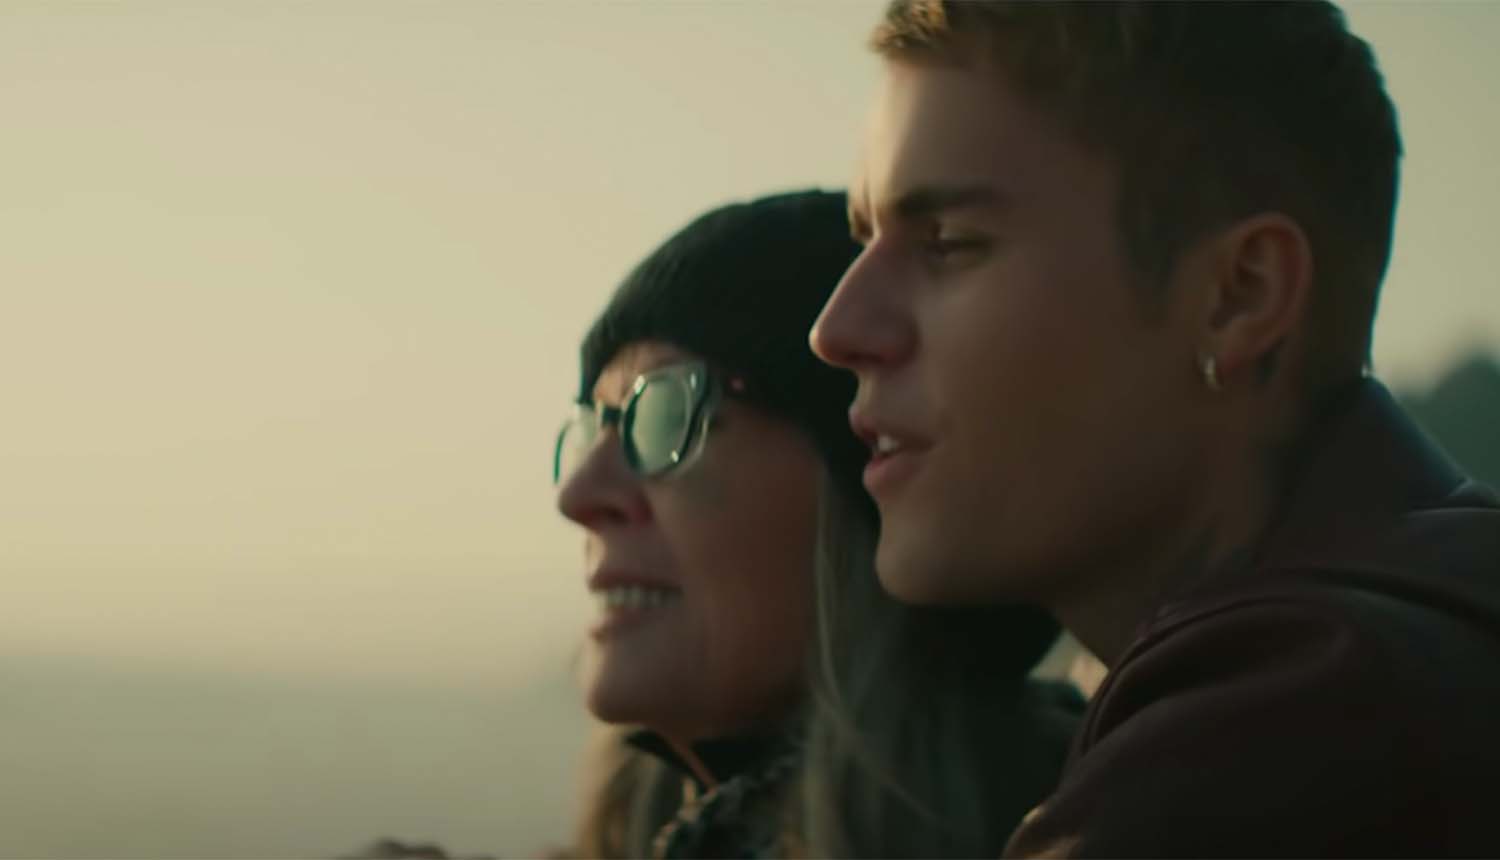 Where Are You Now by Justin Bieber - Song Meanings and Facts